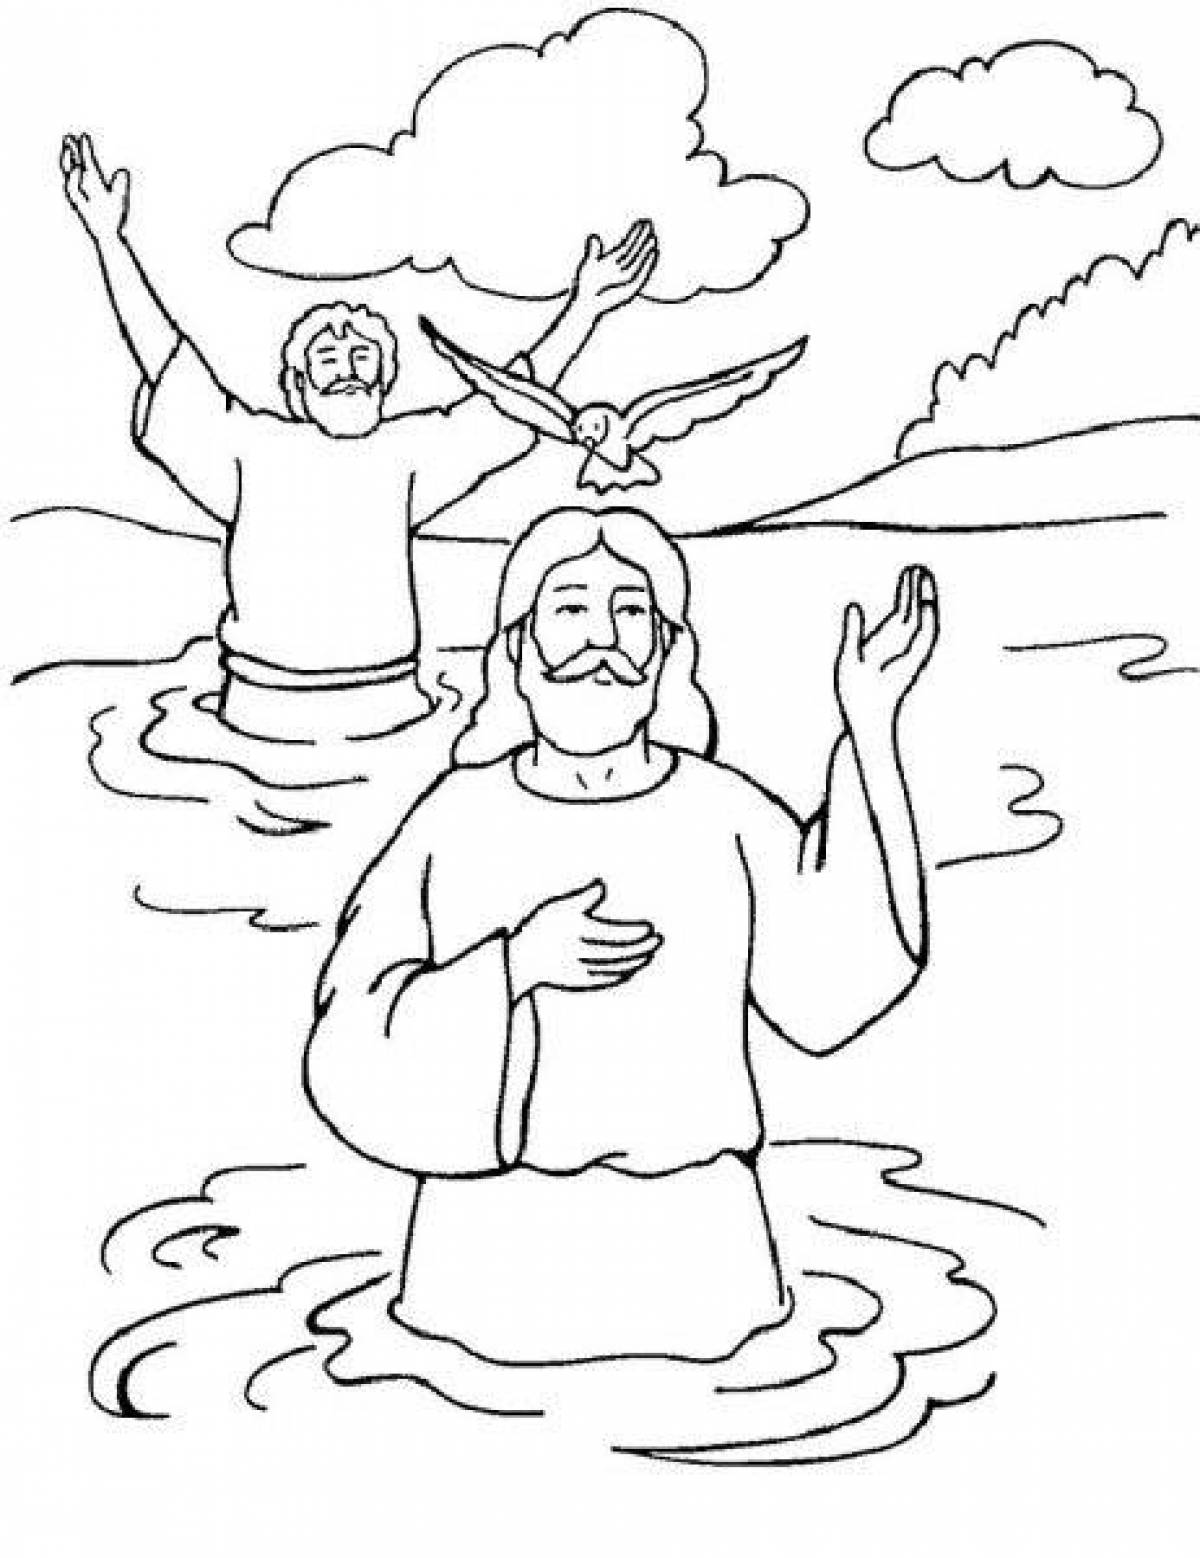 Children's baptism colorful coloring book